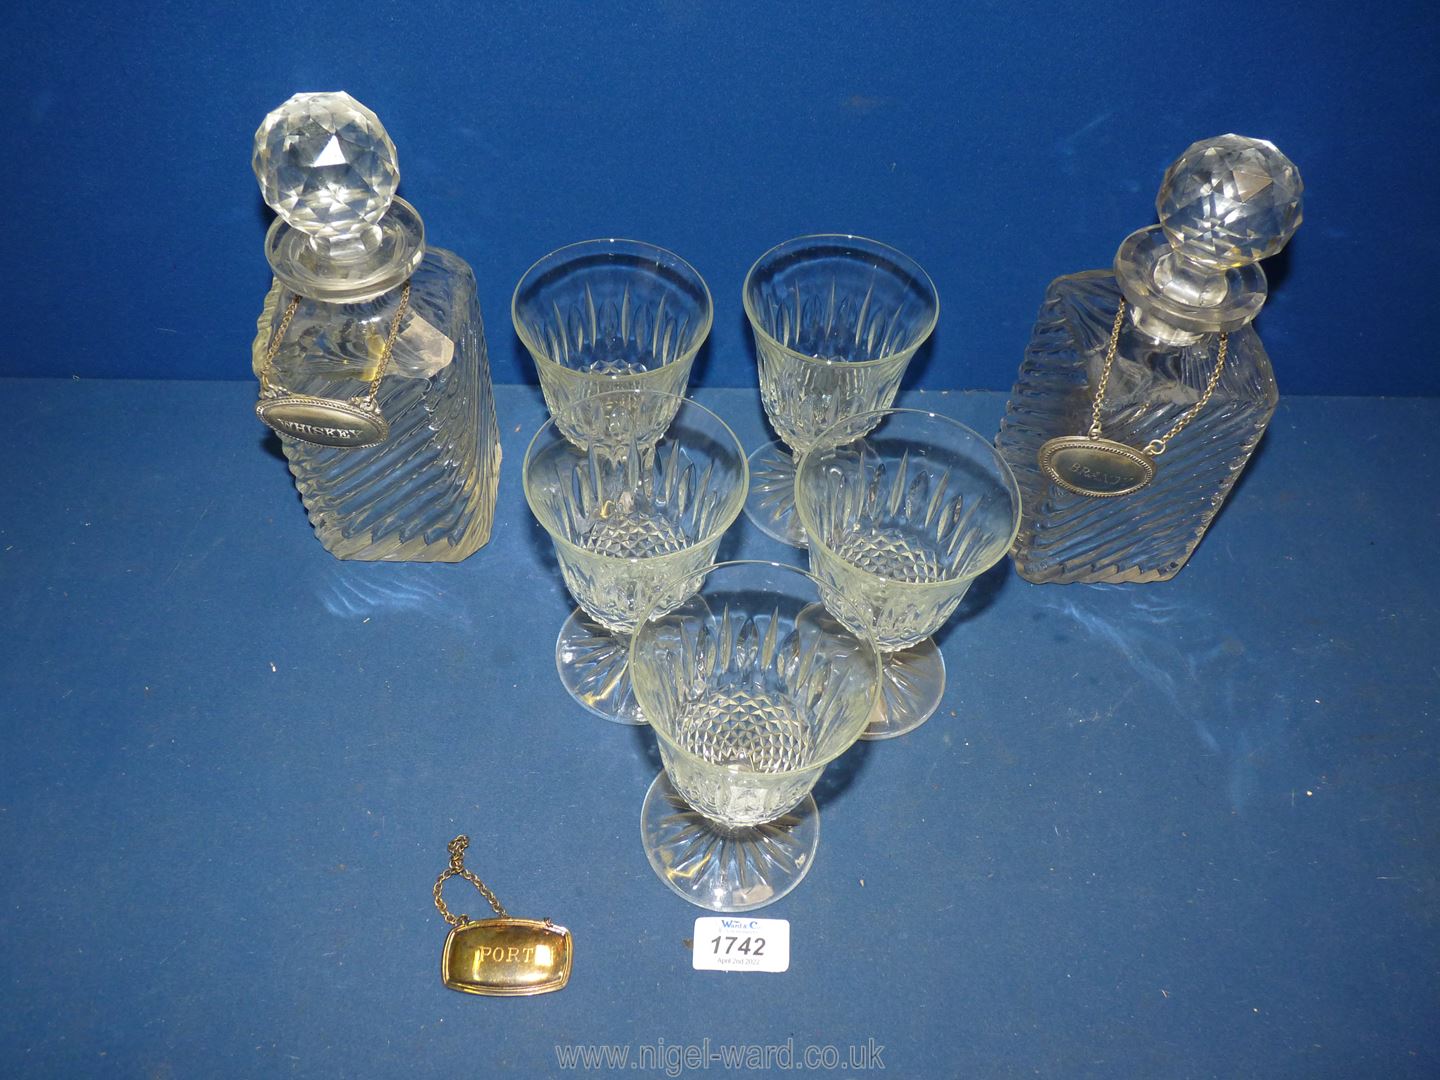 Two small decanters and stoppers, five wine glasses and three decanter labels for Brandy, - Image 2 of 2